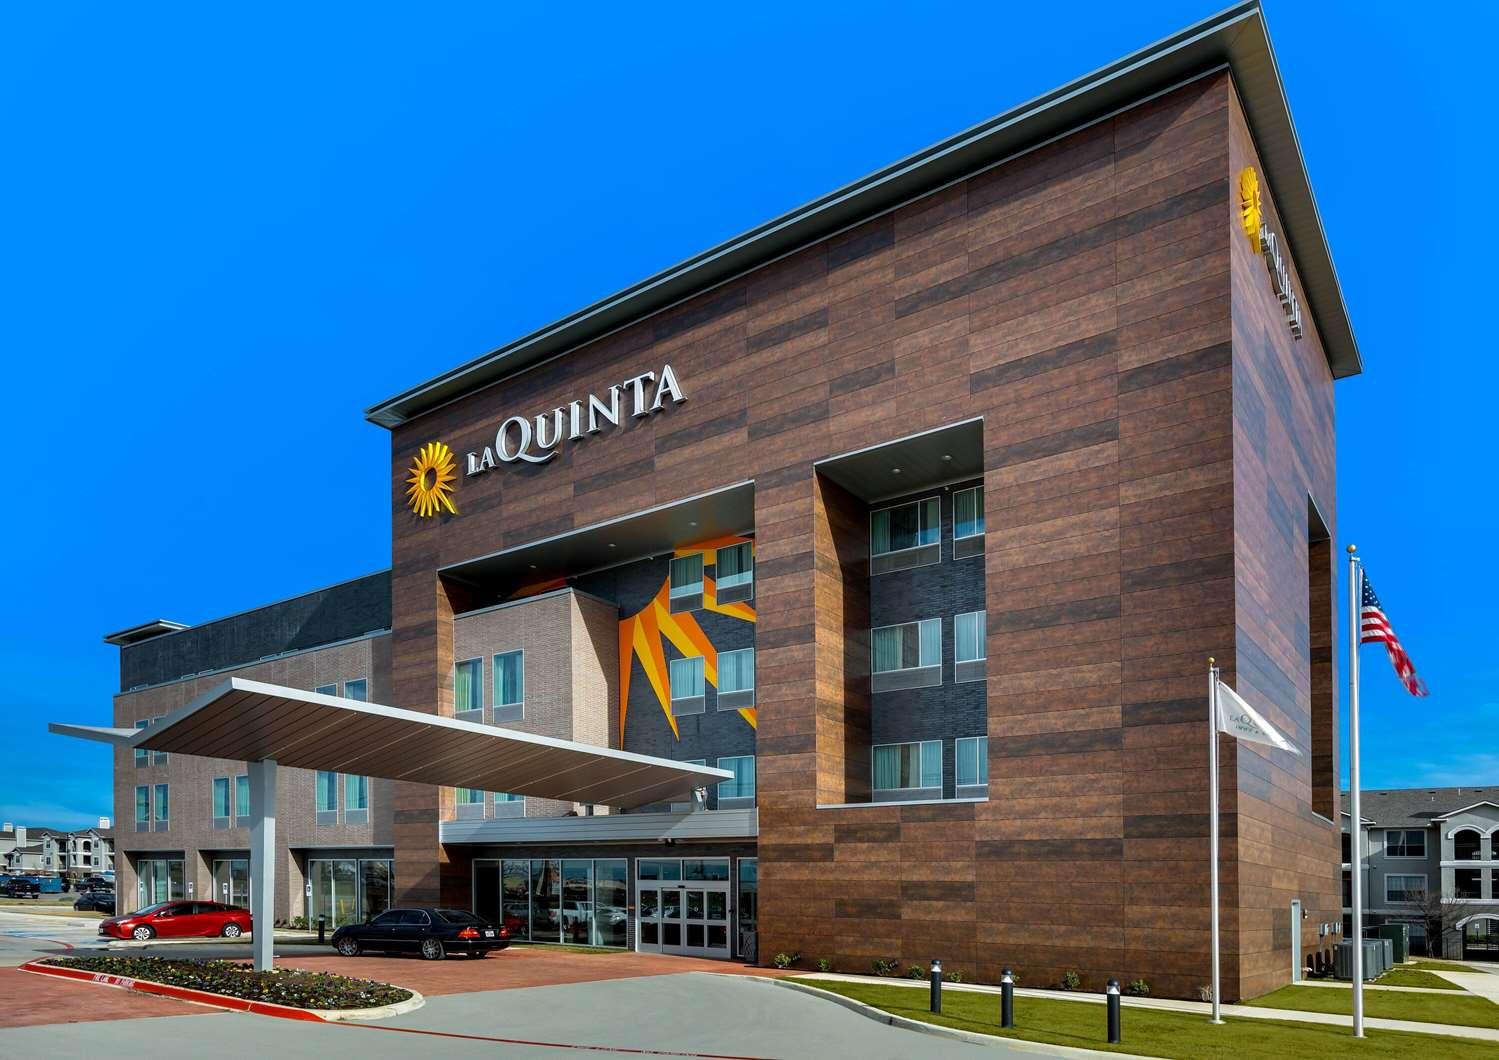 La Quinta Inn & Suites by Wyndham Euless in Euless, TX